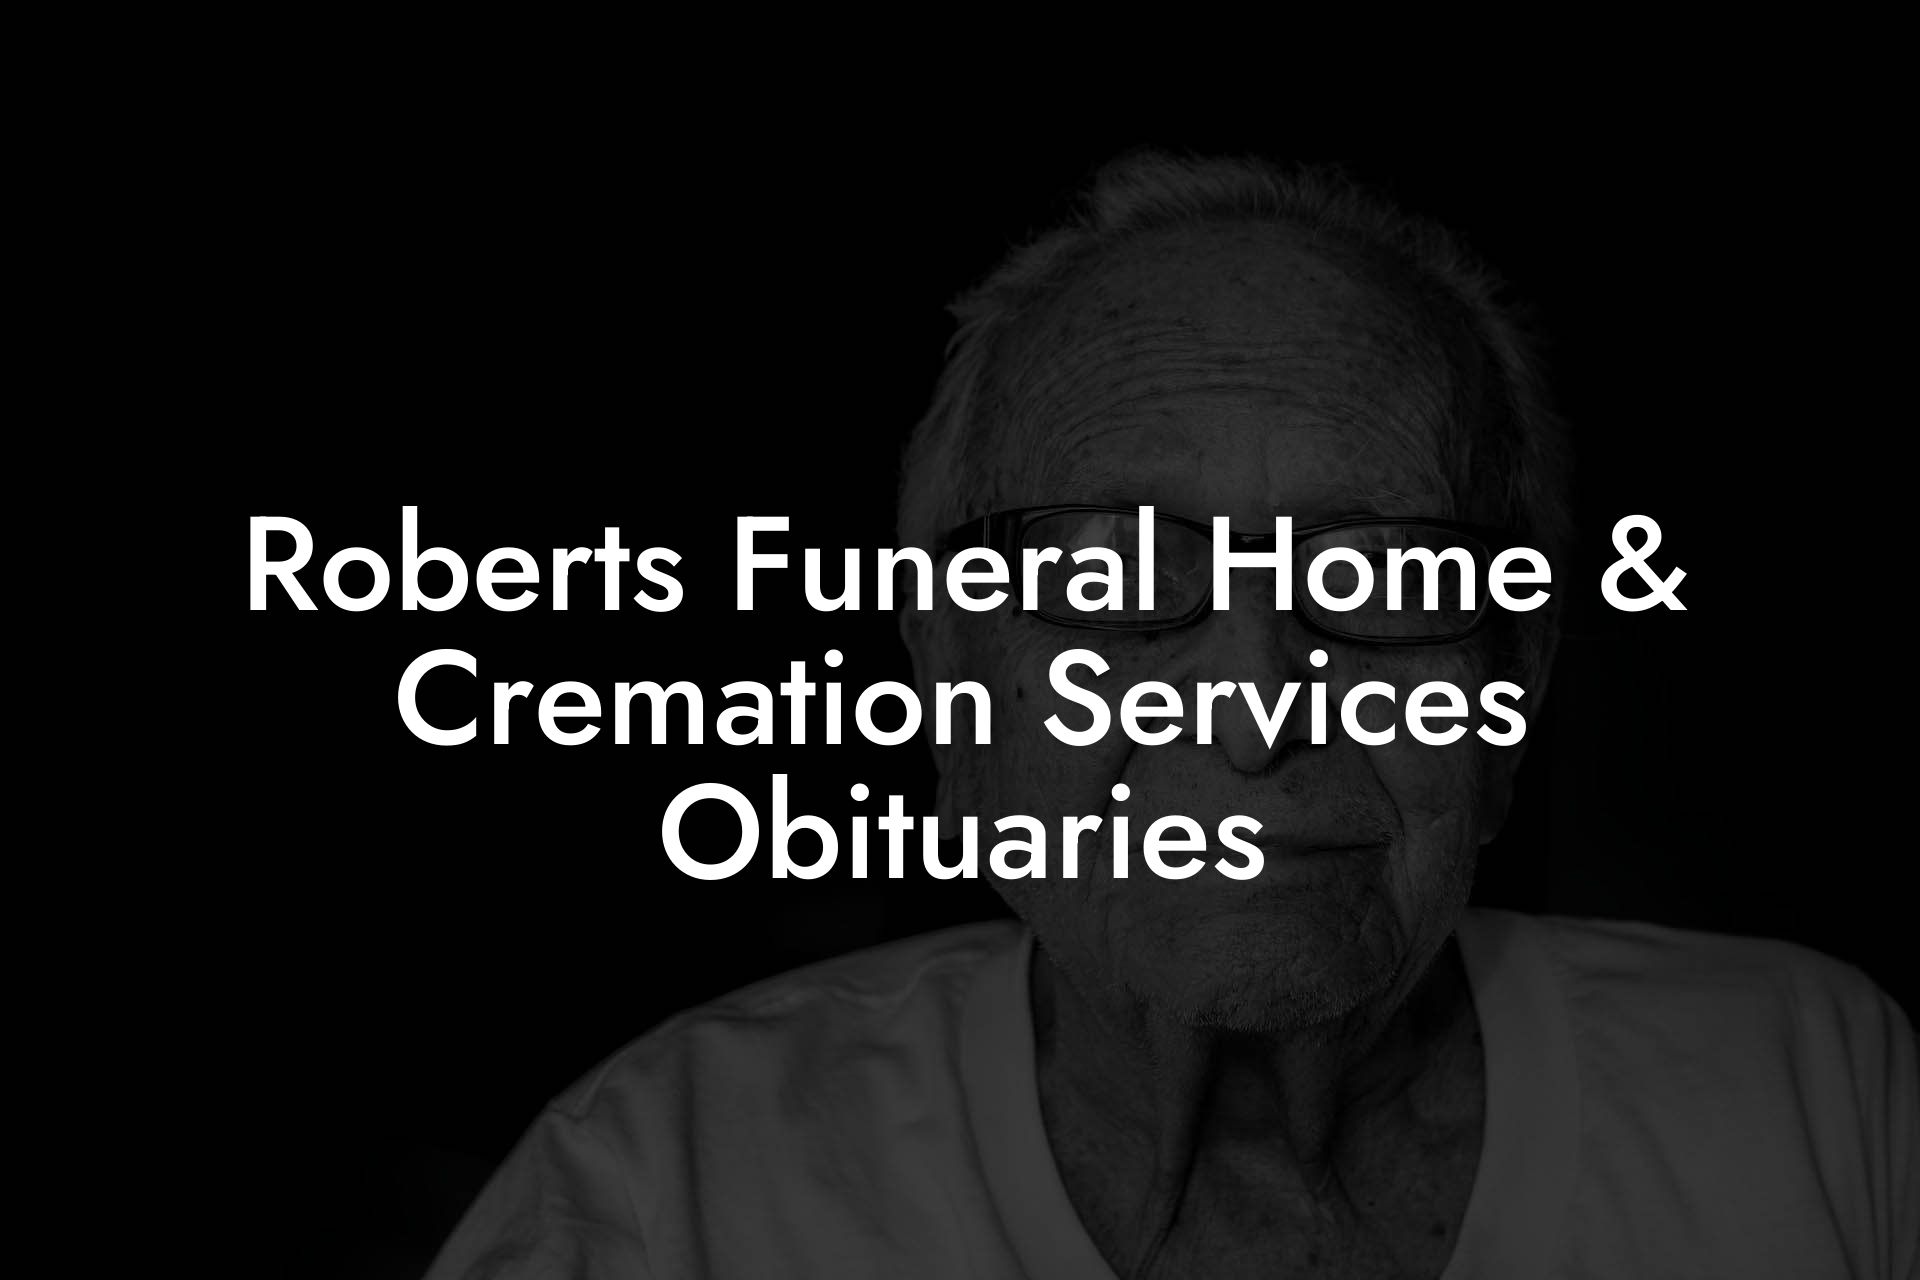 Roberts Funeral Home & Cremation Services Obituaries